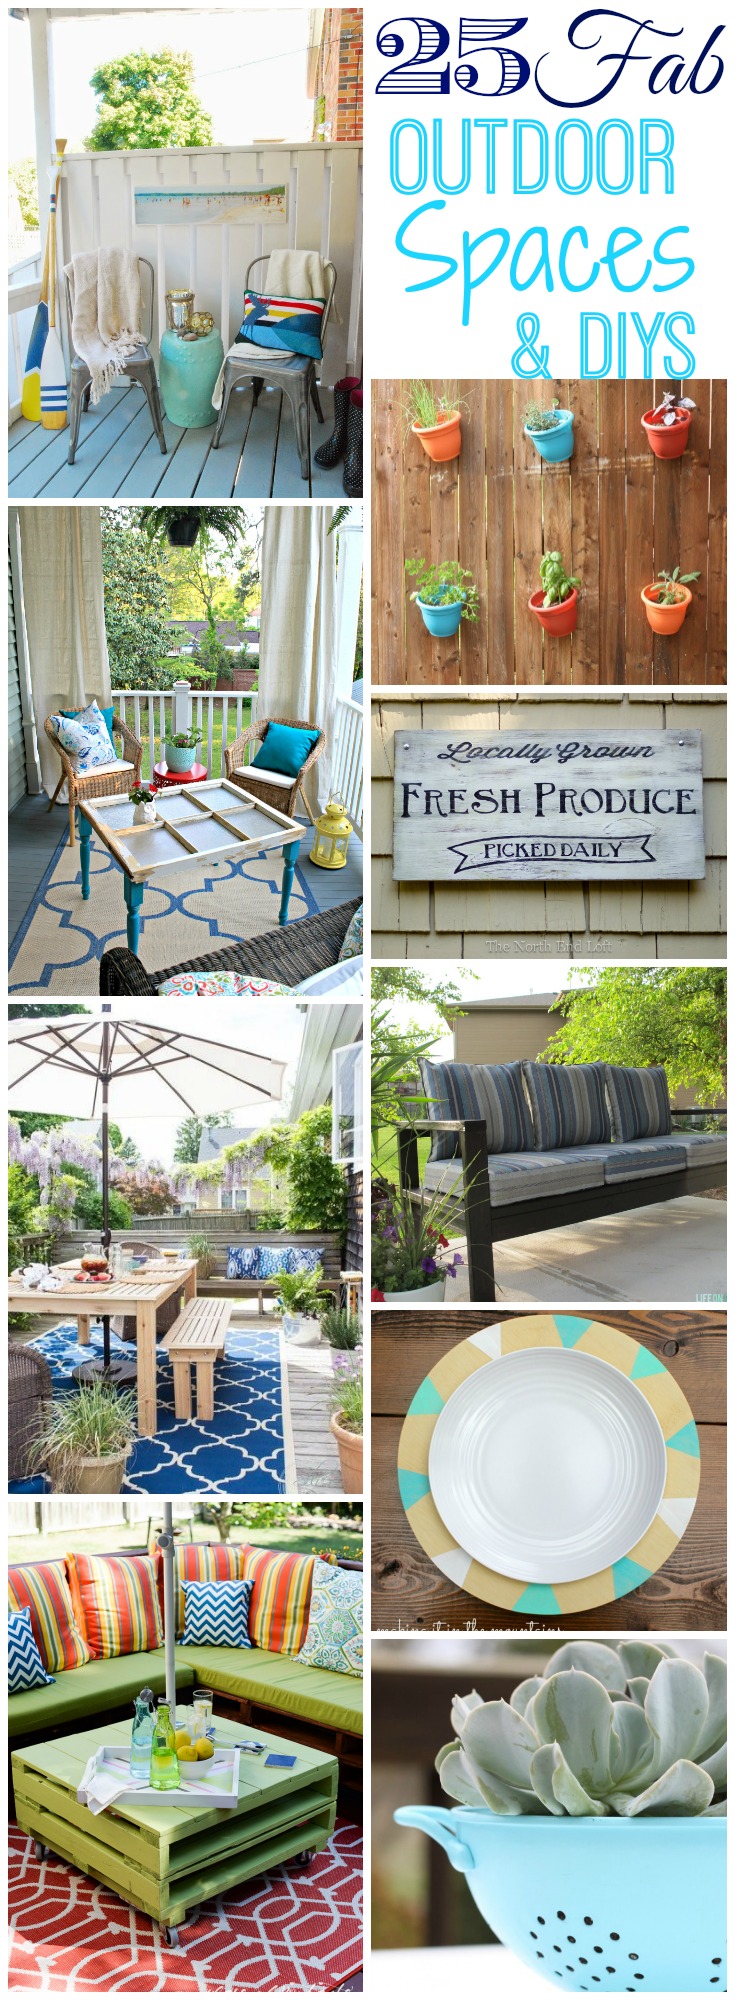 Get totally inspired for summer with these 25 fabulous outdoor spaces and DIYs graphic.